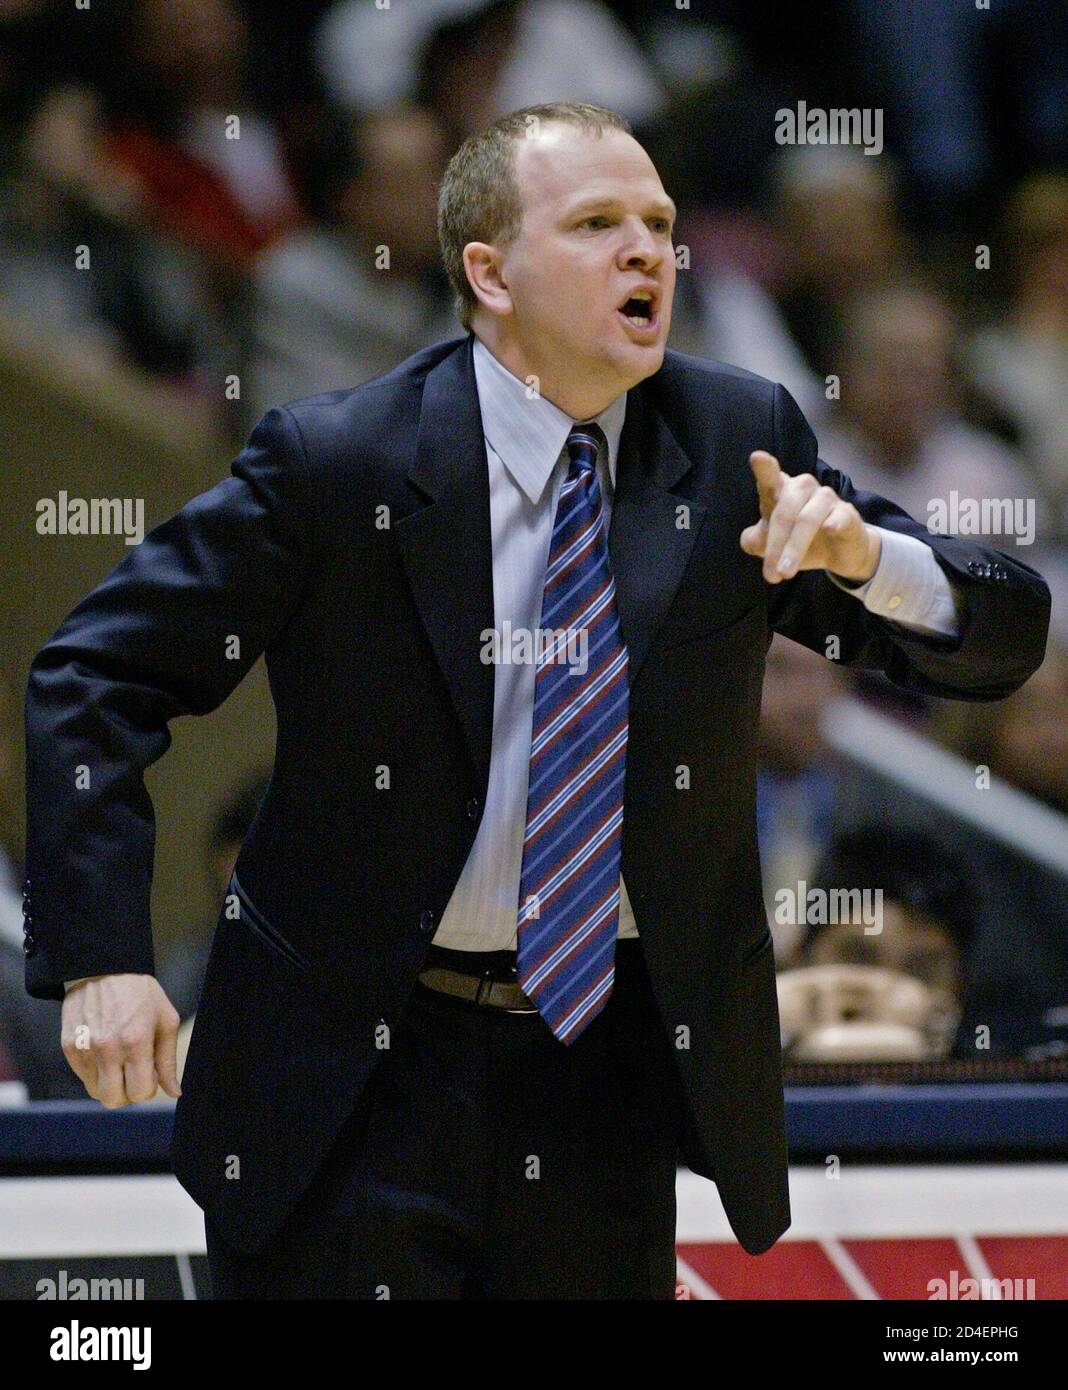 New Jersey Nets coach Lawrence Frank directs his team during their match against the Indiana Pacers in the fourth quarter of their NBA game in East Rutherford, New Jersey, March 22, 2005. The Nets won 98-91.REUTERS/Ray Stubblebine  RFS/DH Stock Photo